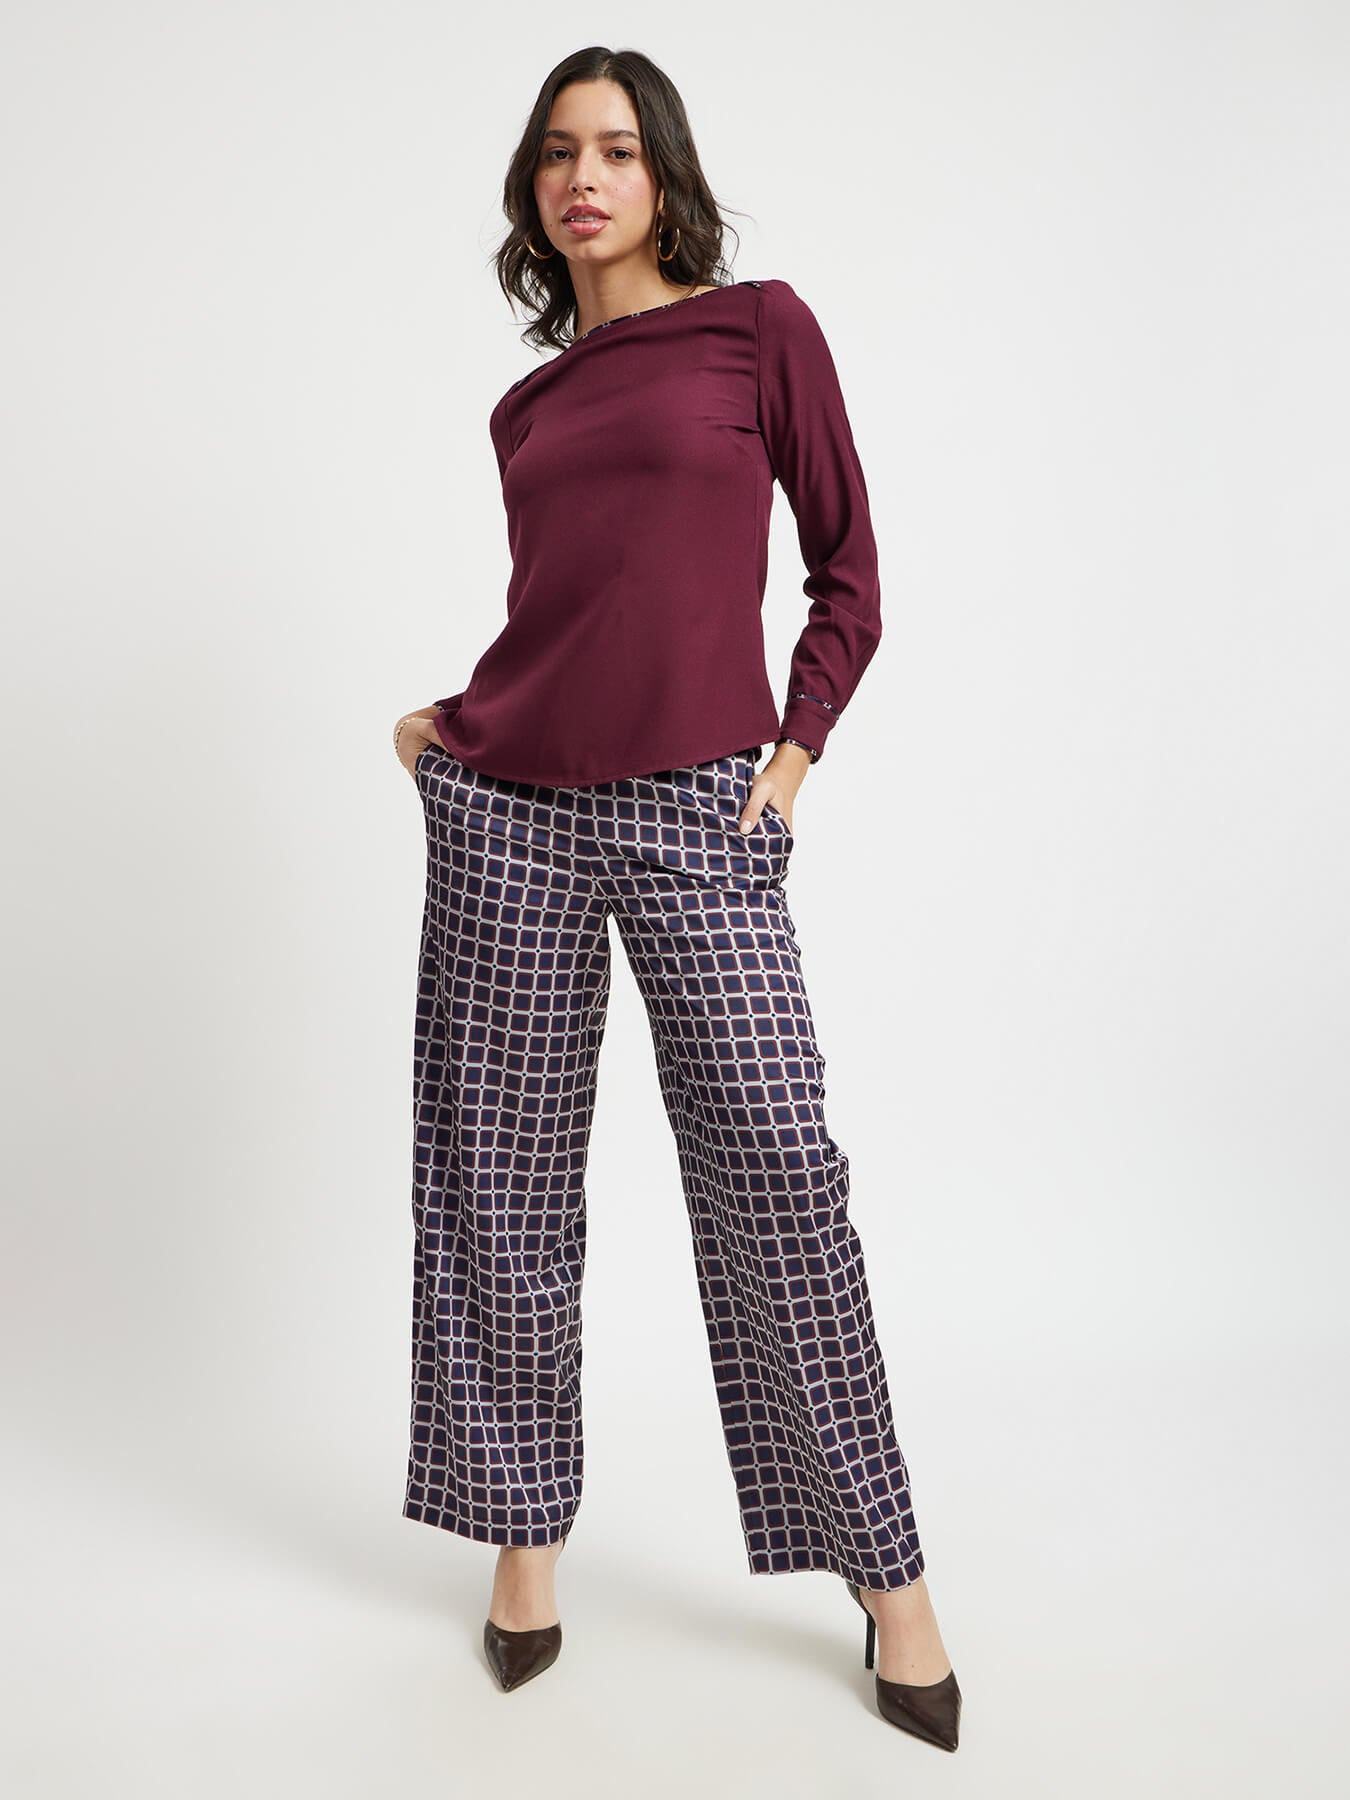 Satin Geometric Print Trousers - Navy And Maroon